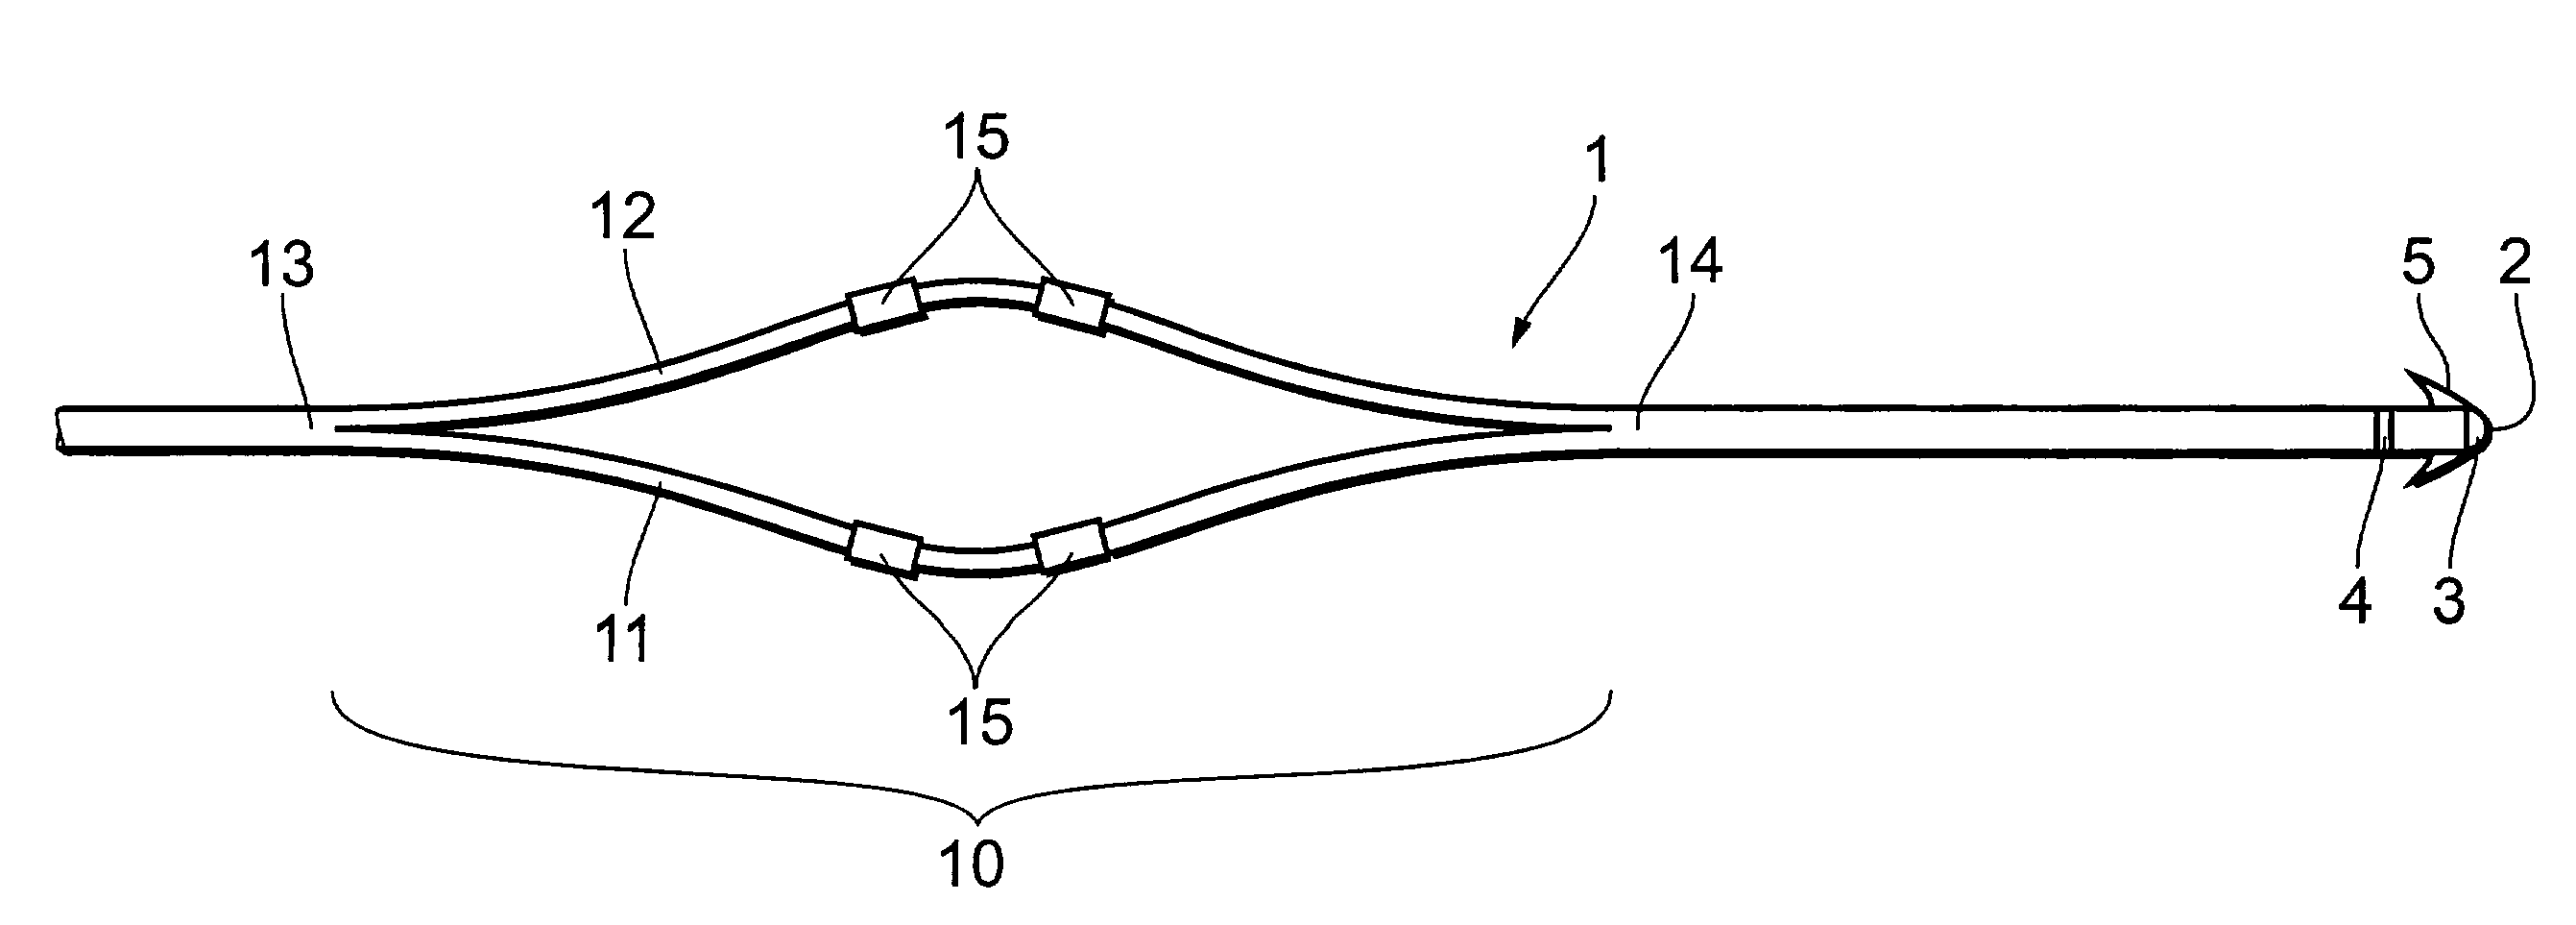 Single electrode probe for a cardiac pacemaker system